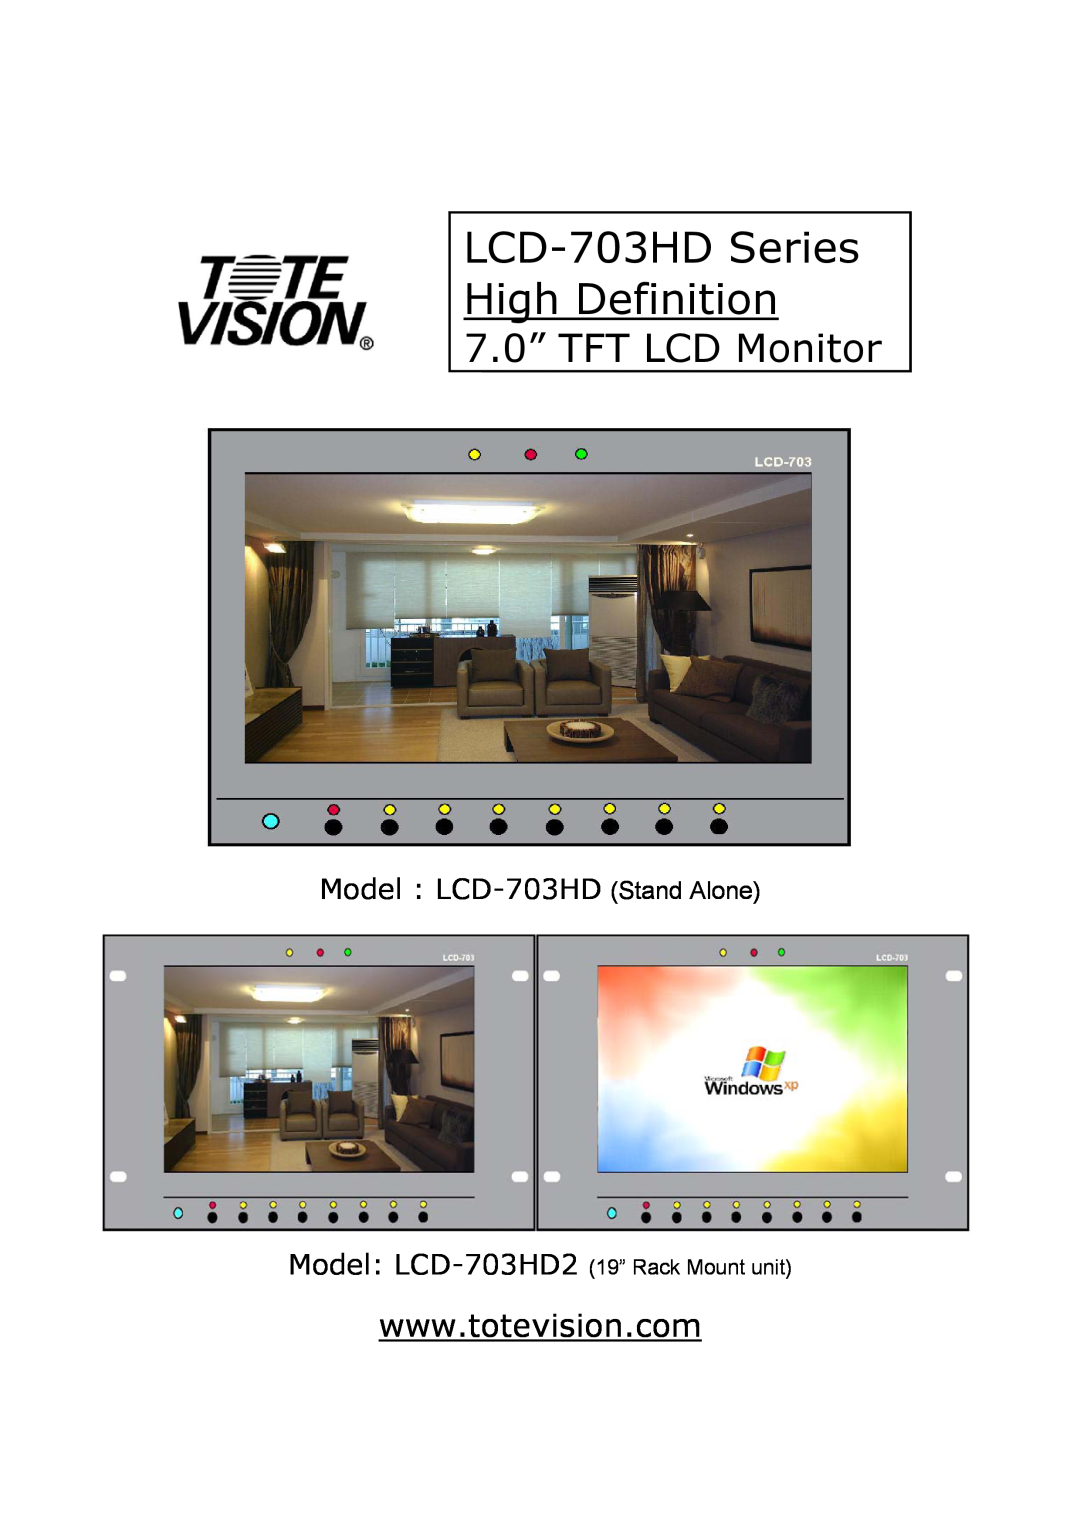 Tote Vision manual LCD-703HD Series High Definition, 7.0” TFT LCD Monitor, Model LCD-703HD Stand Alone 